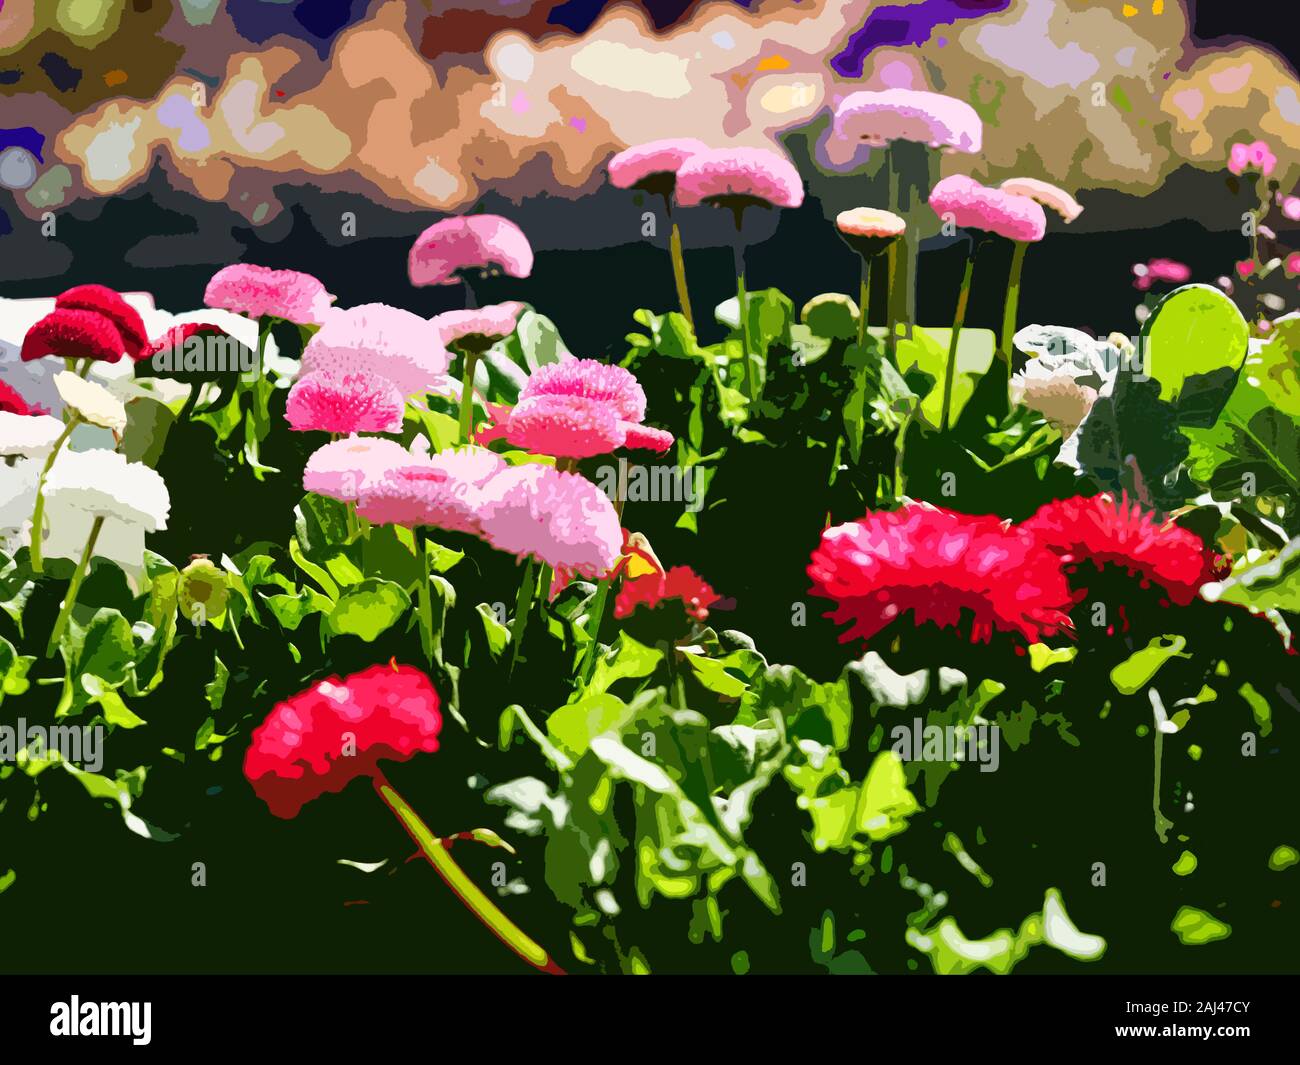 Flowers, Bellis Daisy cut out filter Stock Photo